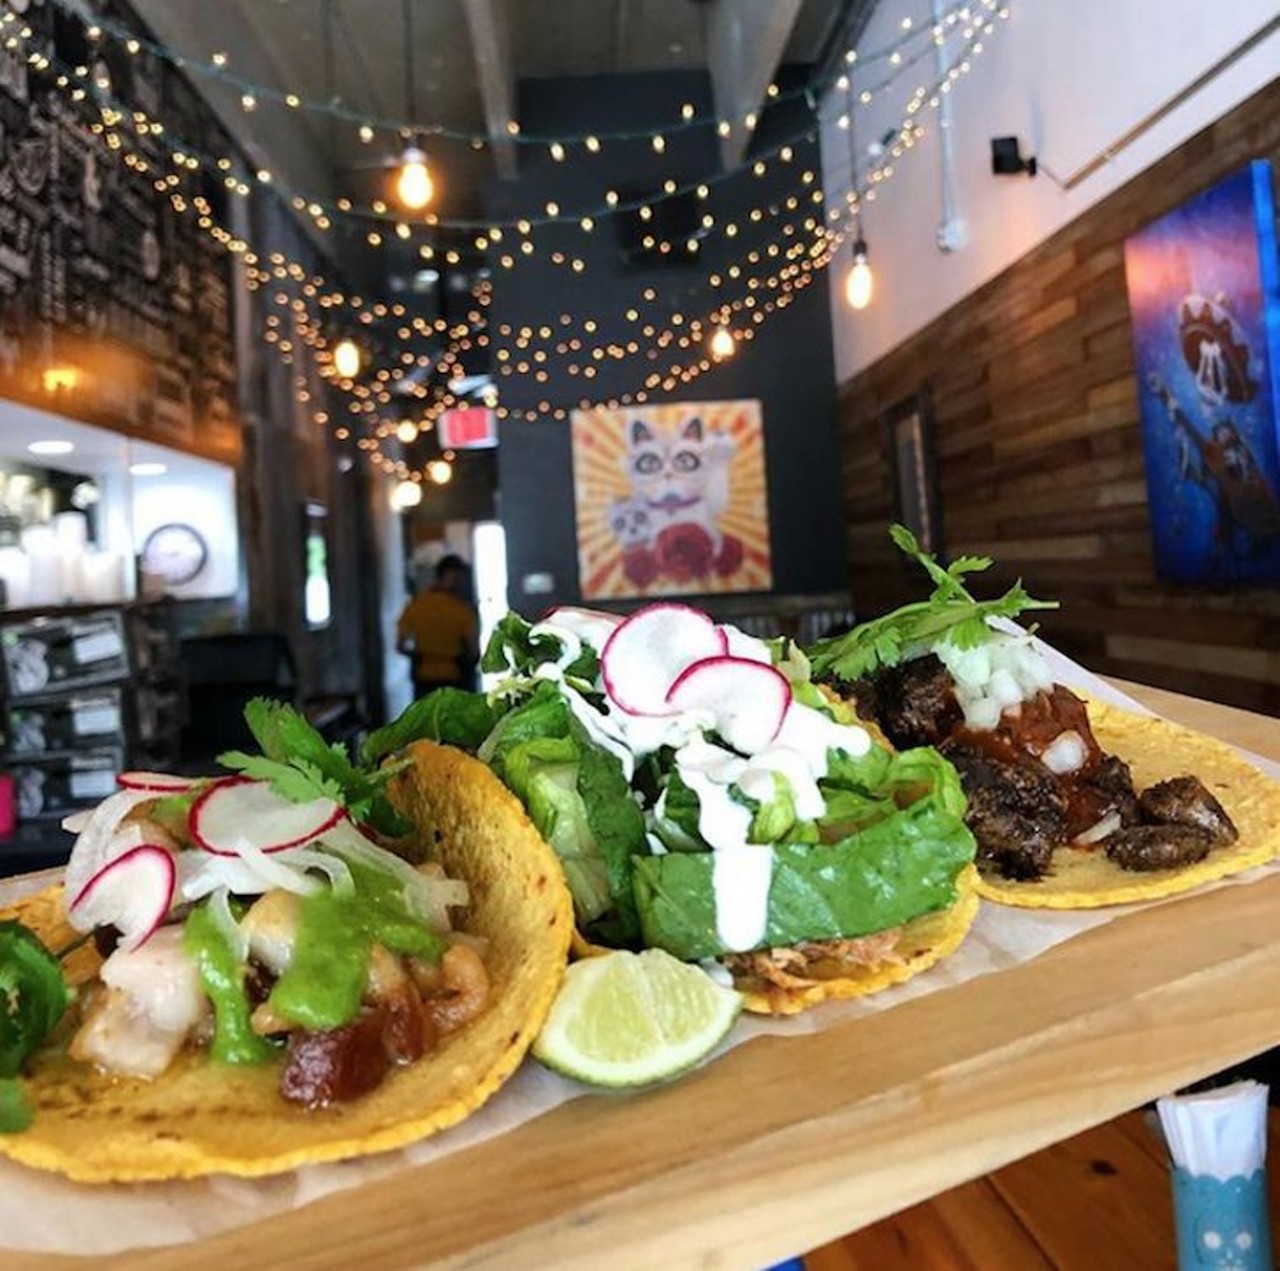 Black Rooster Taqueria
1323 N. Mills Ave. | 407-601-0994
Tacos are carefully constructed and delicious. Settle down with a chicken tinga taco, wrapped in a hot and fresh housemade corn tortilla, or try the achiote bowl if you're super hungry.
Photo via blkroostertaco/Instagram